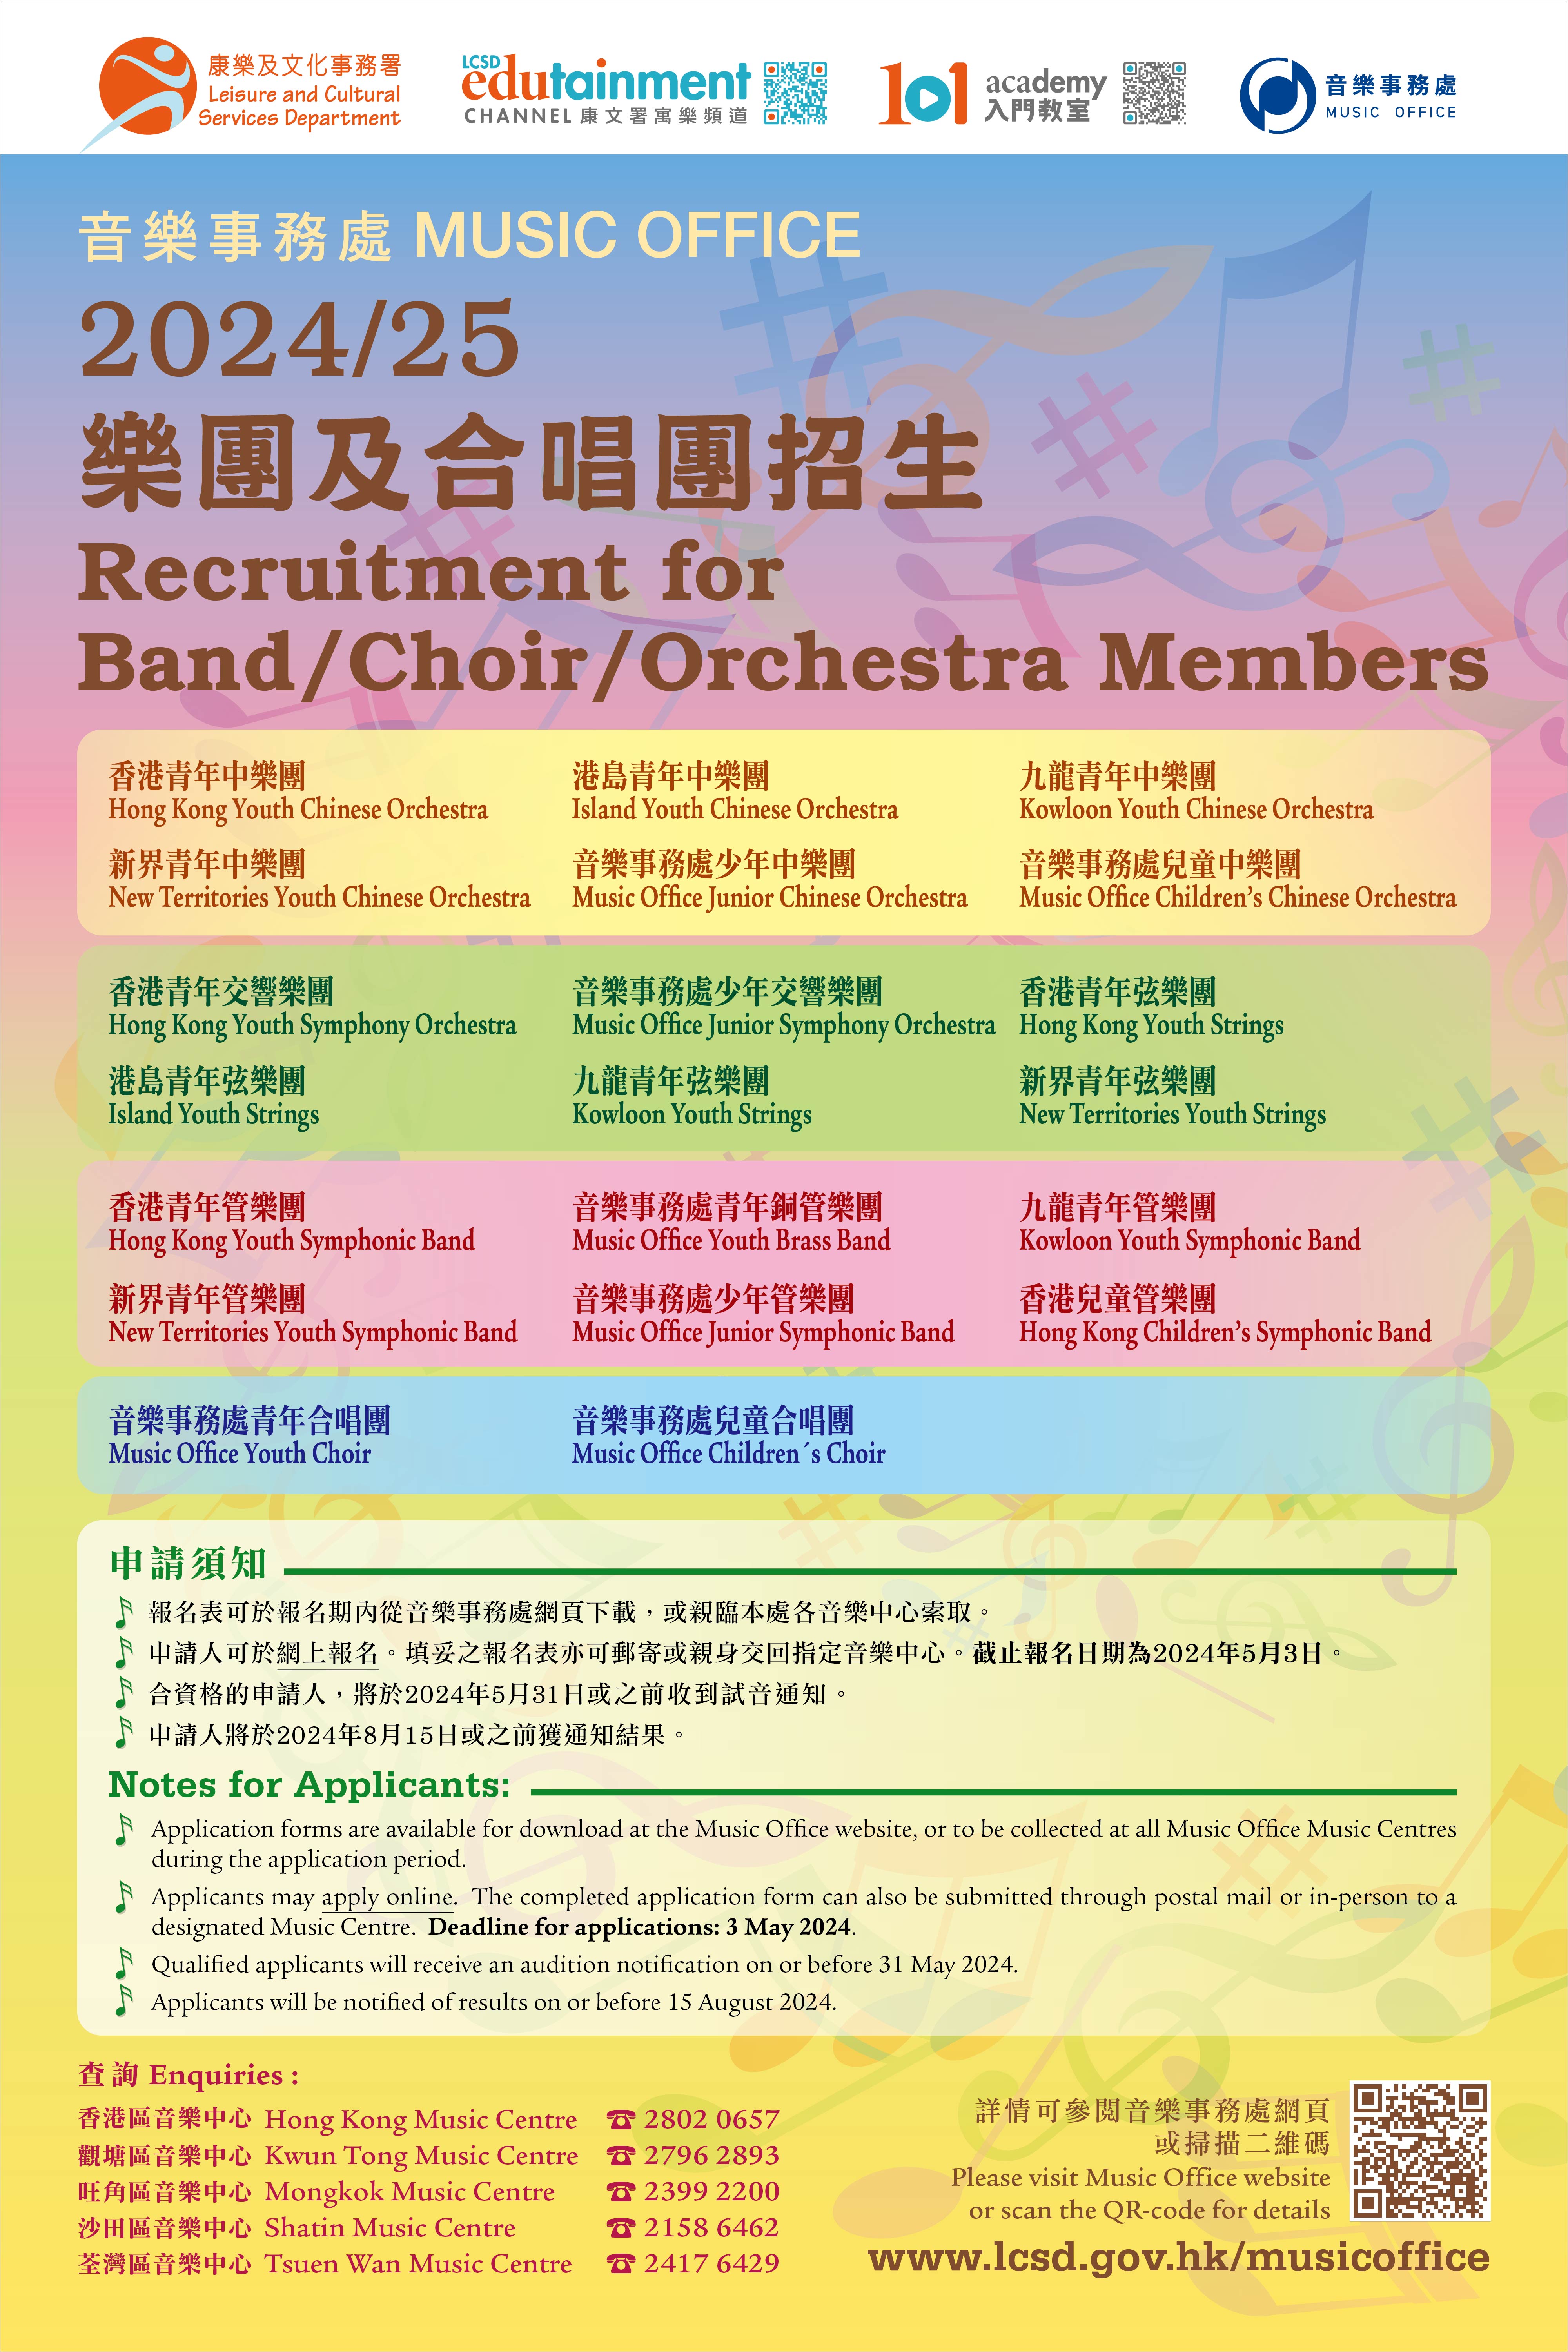 Recruitment for 2024/25 Band/Choir/Orchestra Members